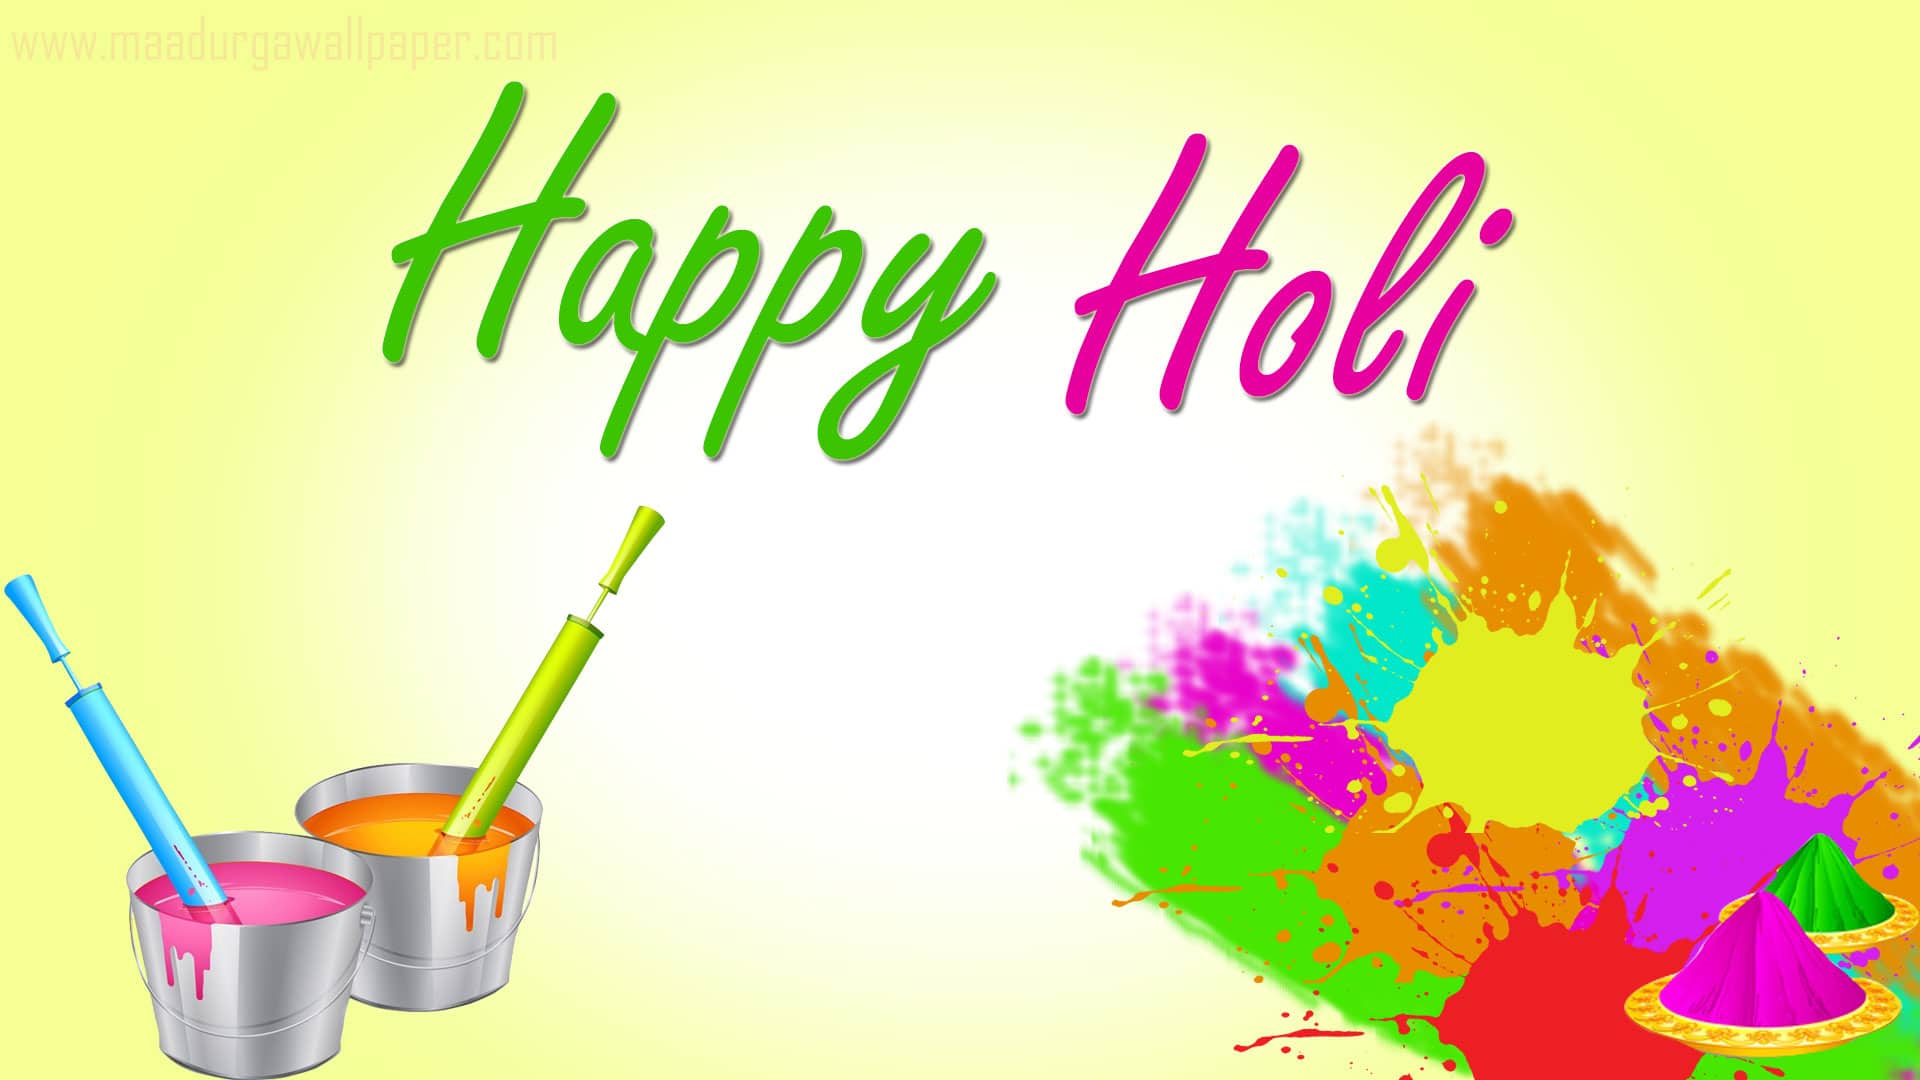 Happy Holi Wallpapers - Happy Holi Images 2019 Hd , HD Wallpaper & Backgrounds